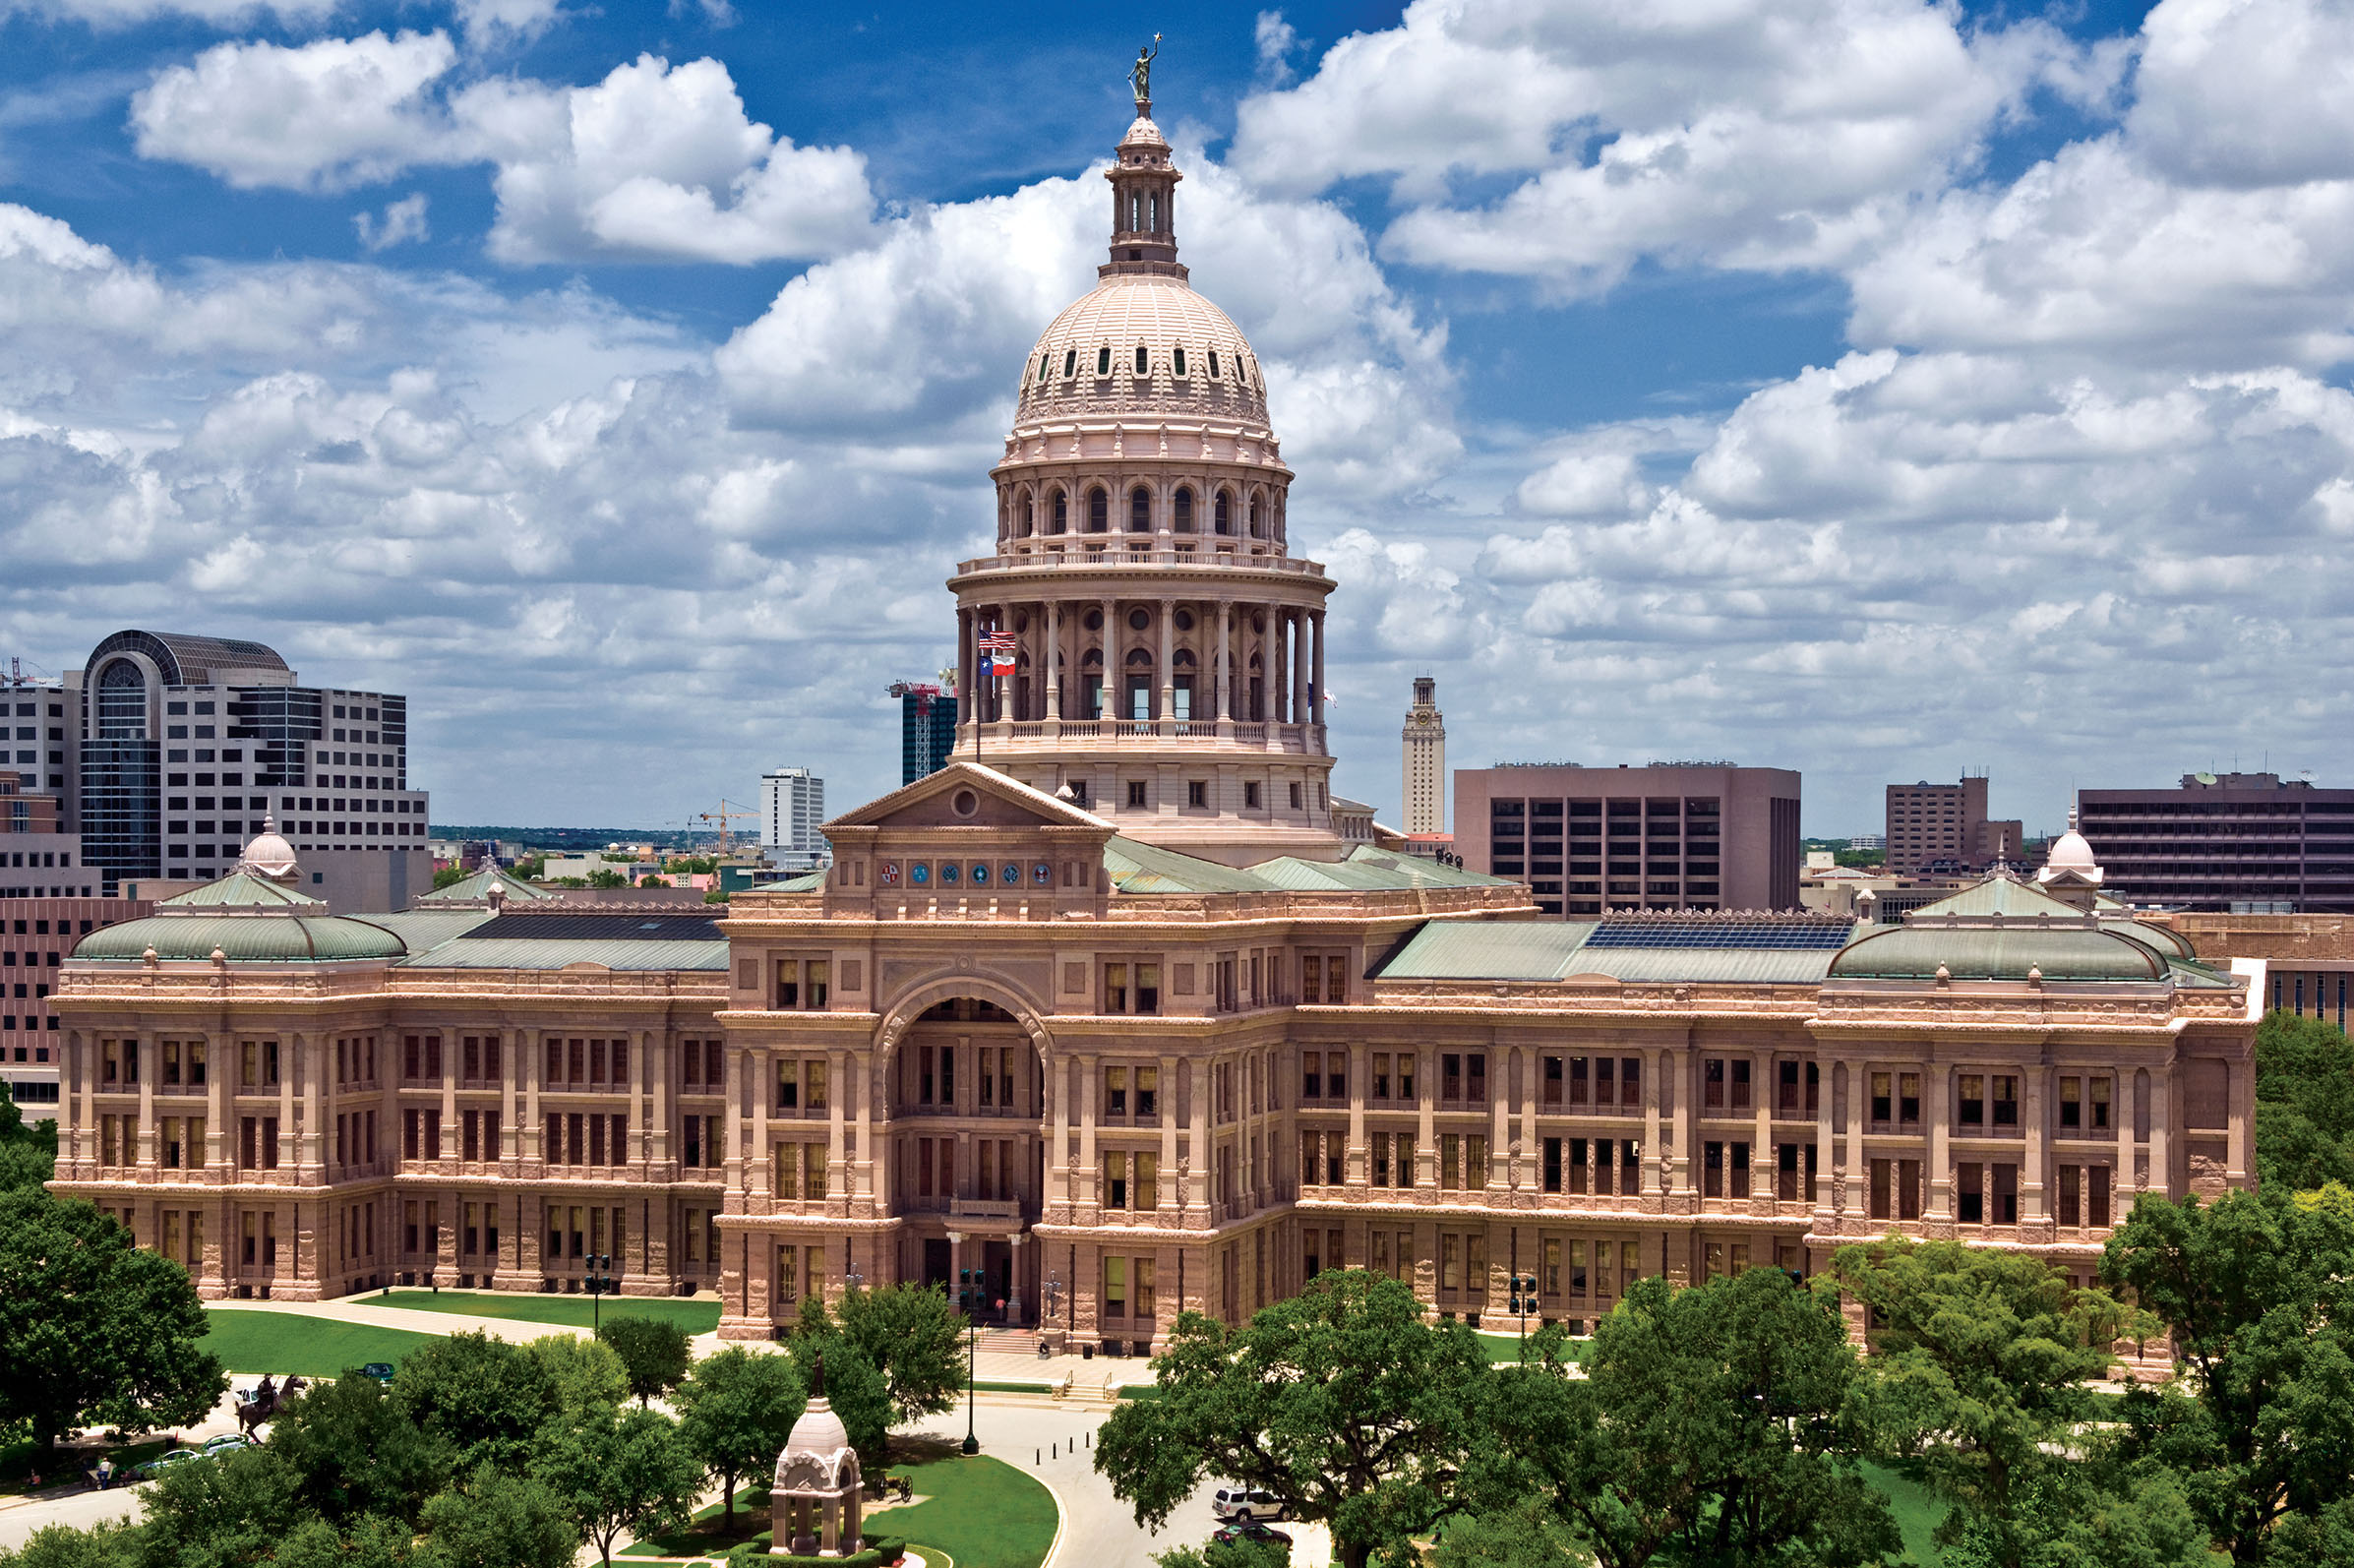 The pink Texas State Capitol stands tall under a bright blue sky dotted with clouds